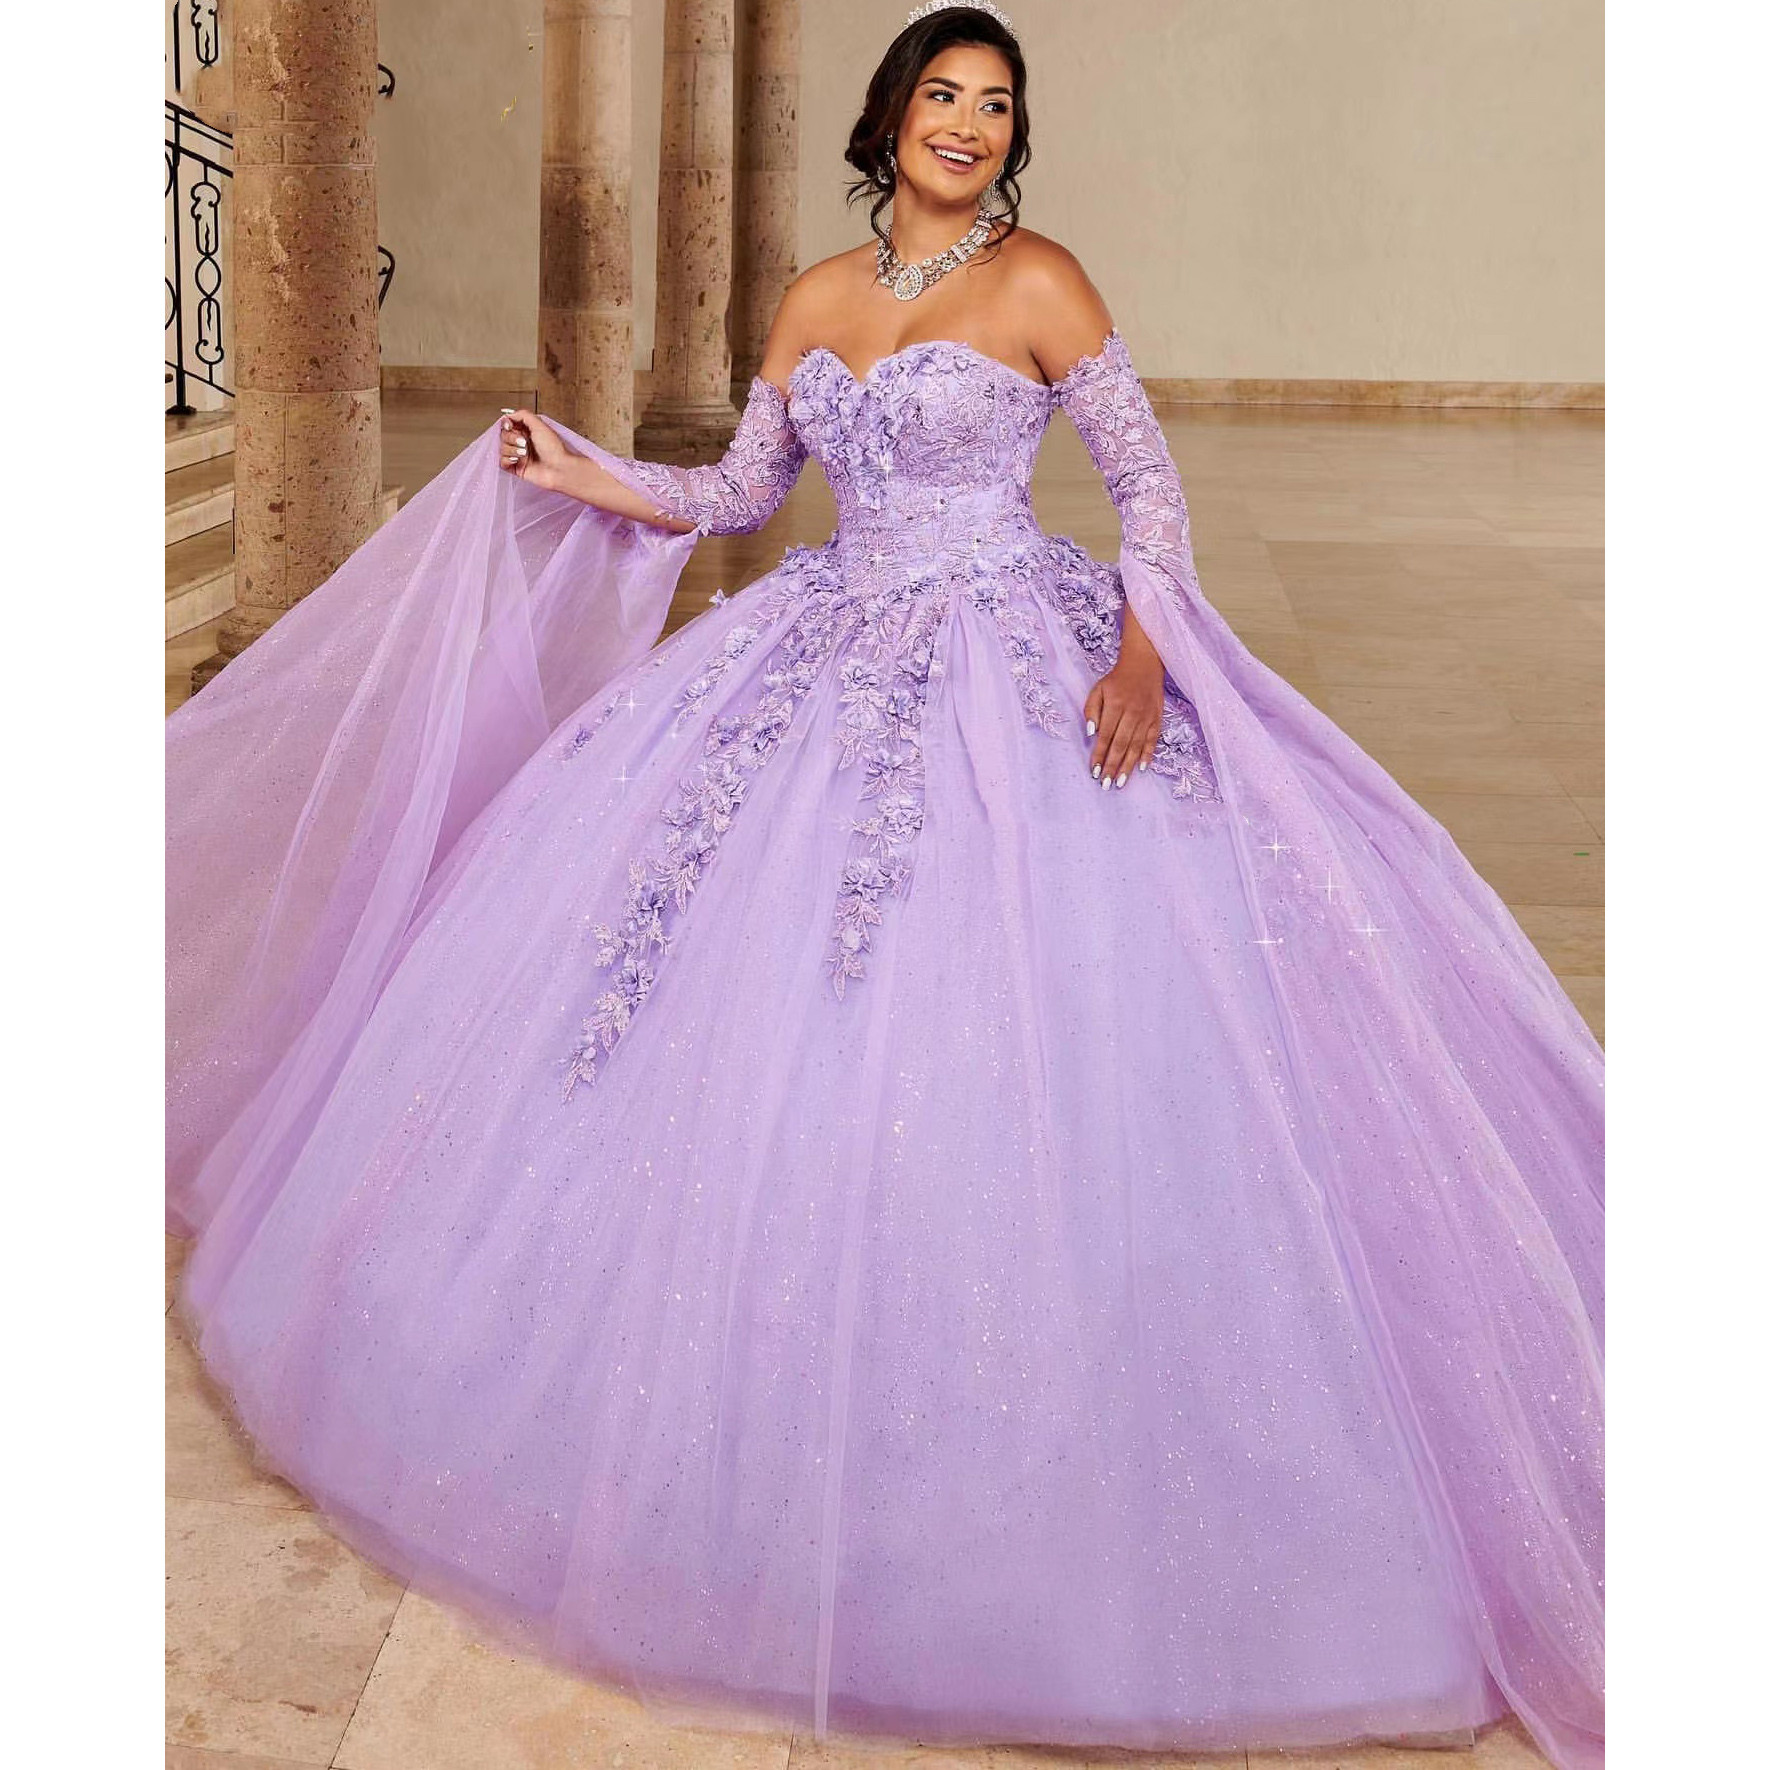 

Light Purple Quinceanera Dresses 2022 For Sweet 16 Girl Appliques Beading Princess Ball Gown Birthday Party Prom Dress Vestidos De 15 Años, Light yellow